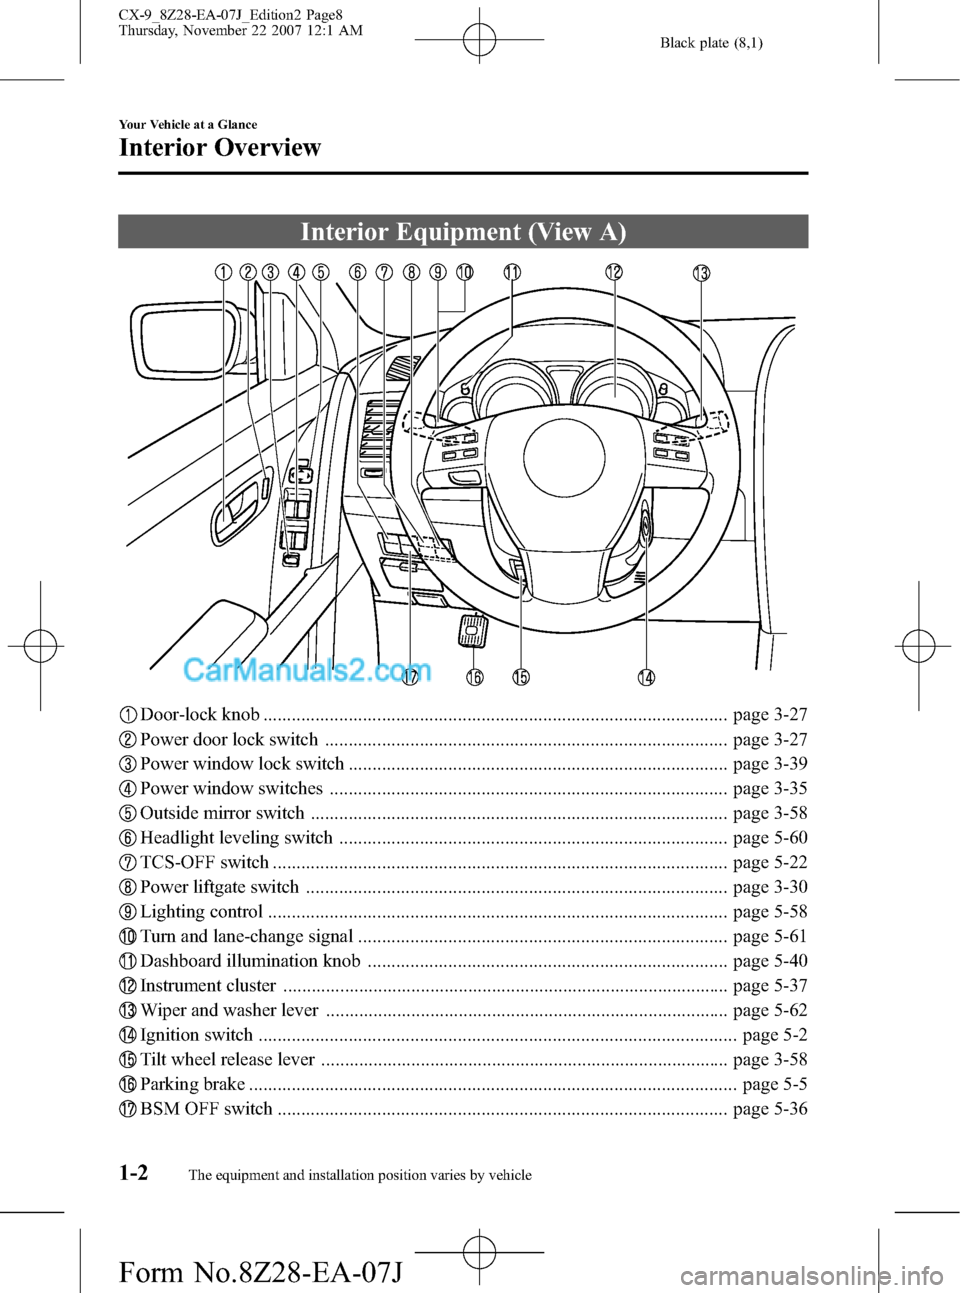 MAZDA MODEL CX-9 2008  Owners Manual (in English) Black plate (8,1)
Interior Equipment (View A)
Door-lock knob .................................................................................................. page 3-27
Power door lock switch .......